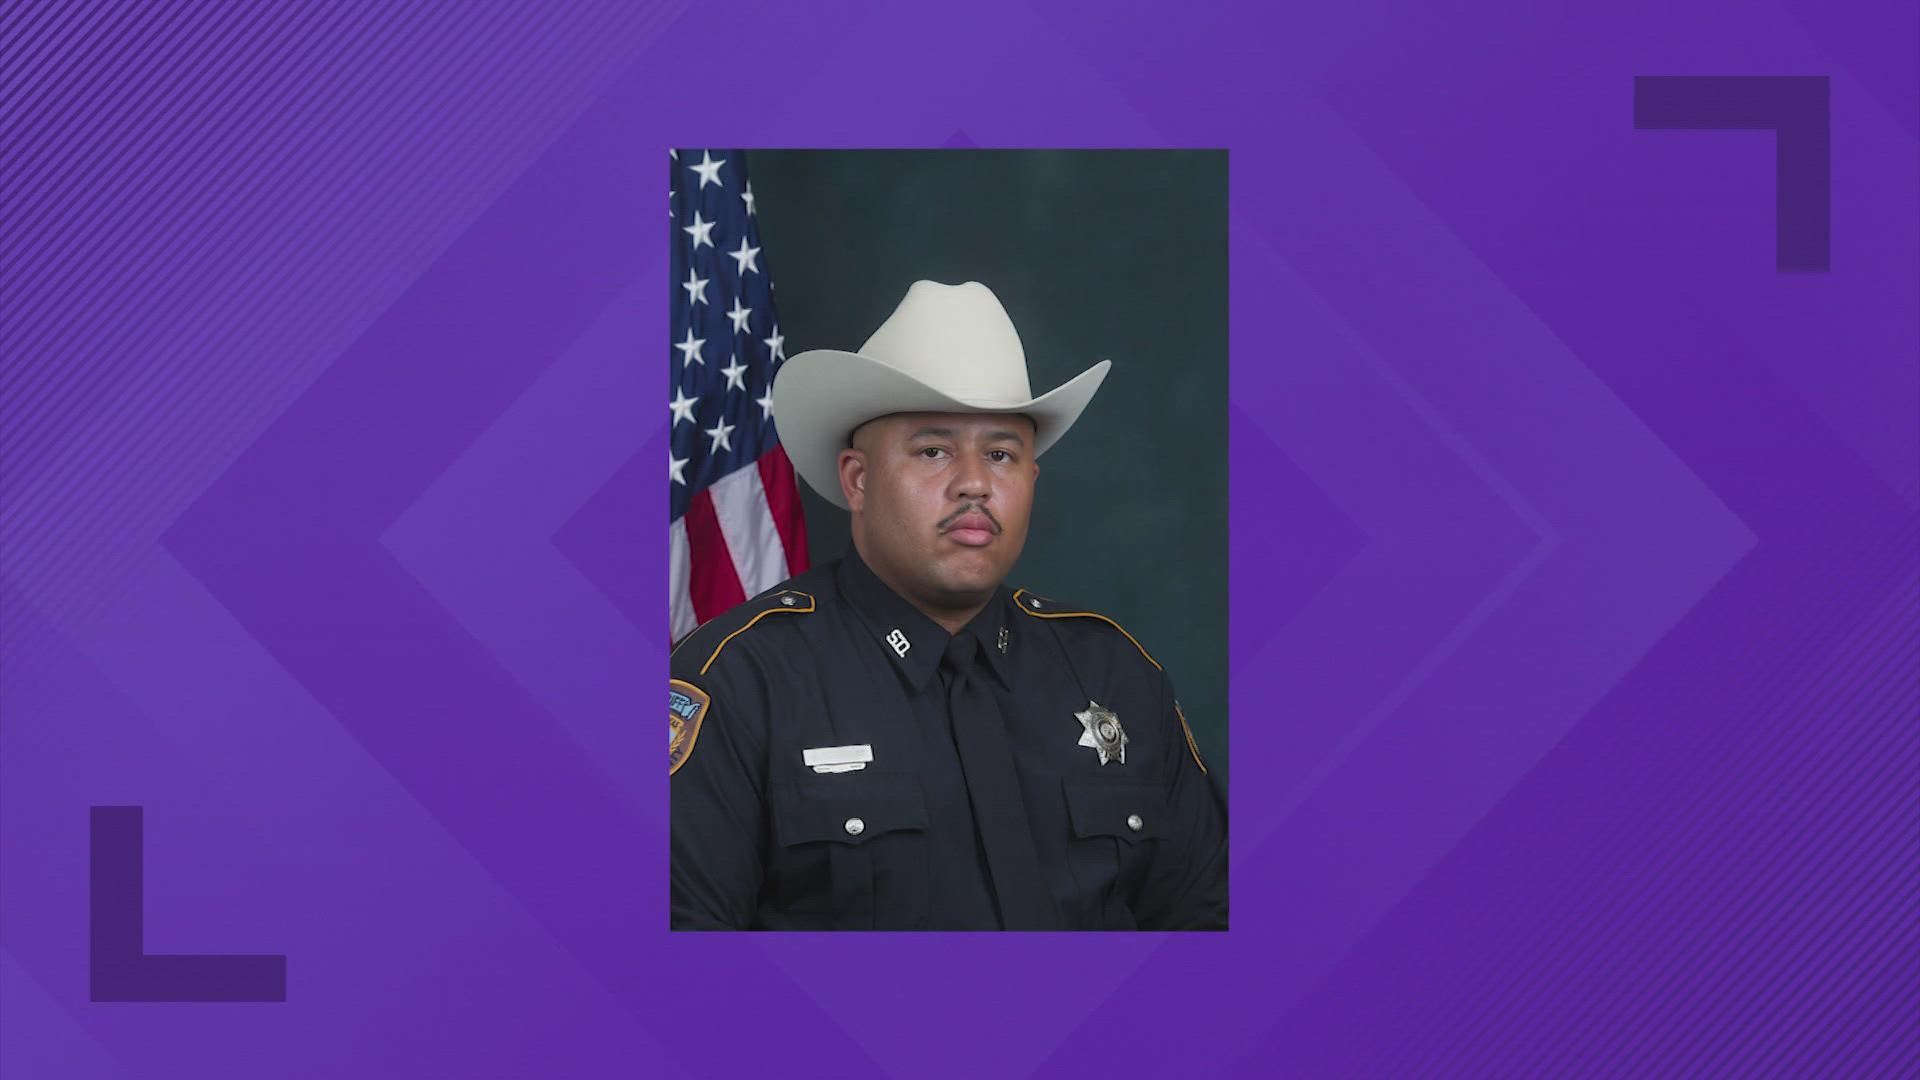 Deptuty Shaun Waters is the fifth Harris County Sheriff's Office deputy to die after contracting COVID-19.